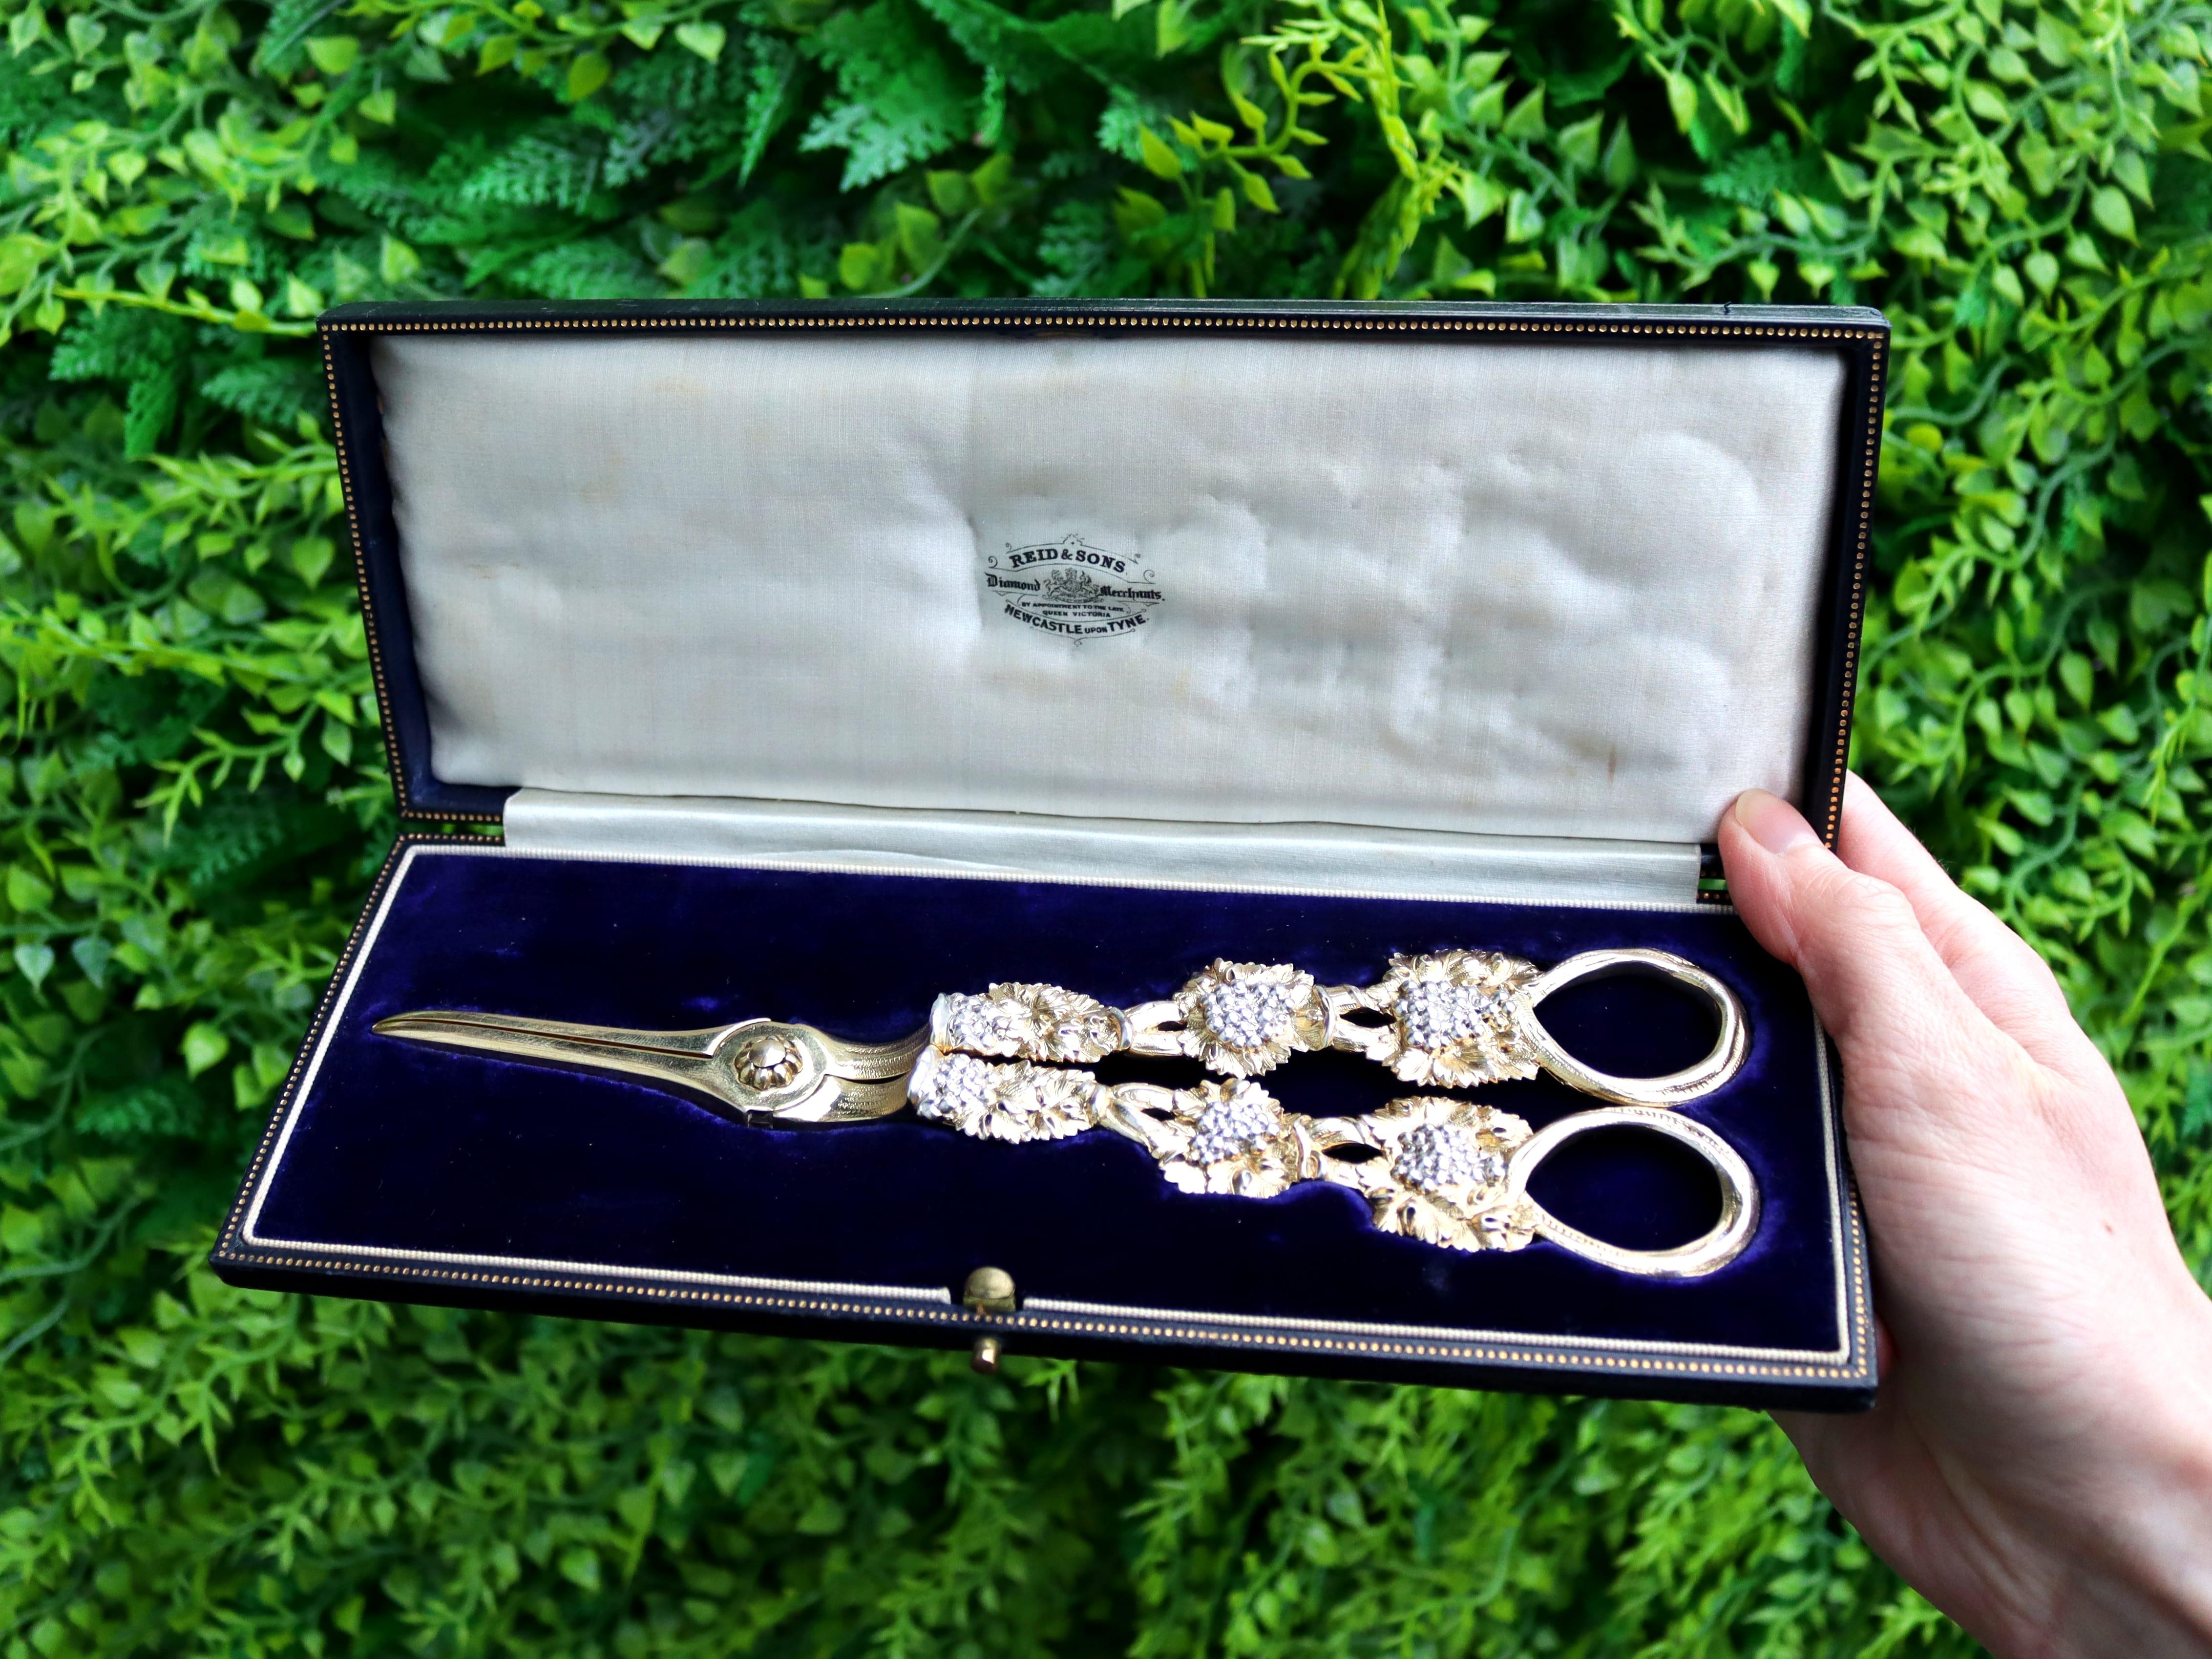 An exceptional, fine and impressive pair of antique George IV English sterling silver gilt grape shears - boxed; an addition to our silver flatware collection.

This exceptional pair of antique cast sterling silver gilt grape shears has a hinged